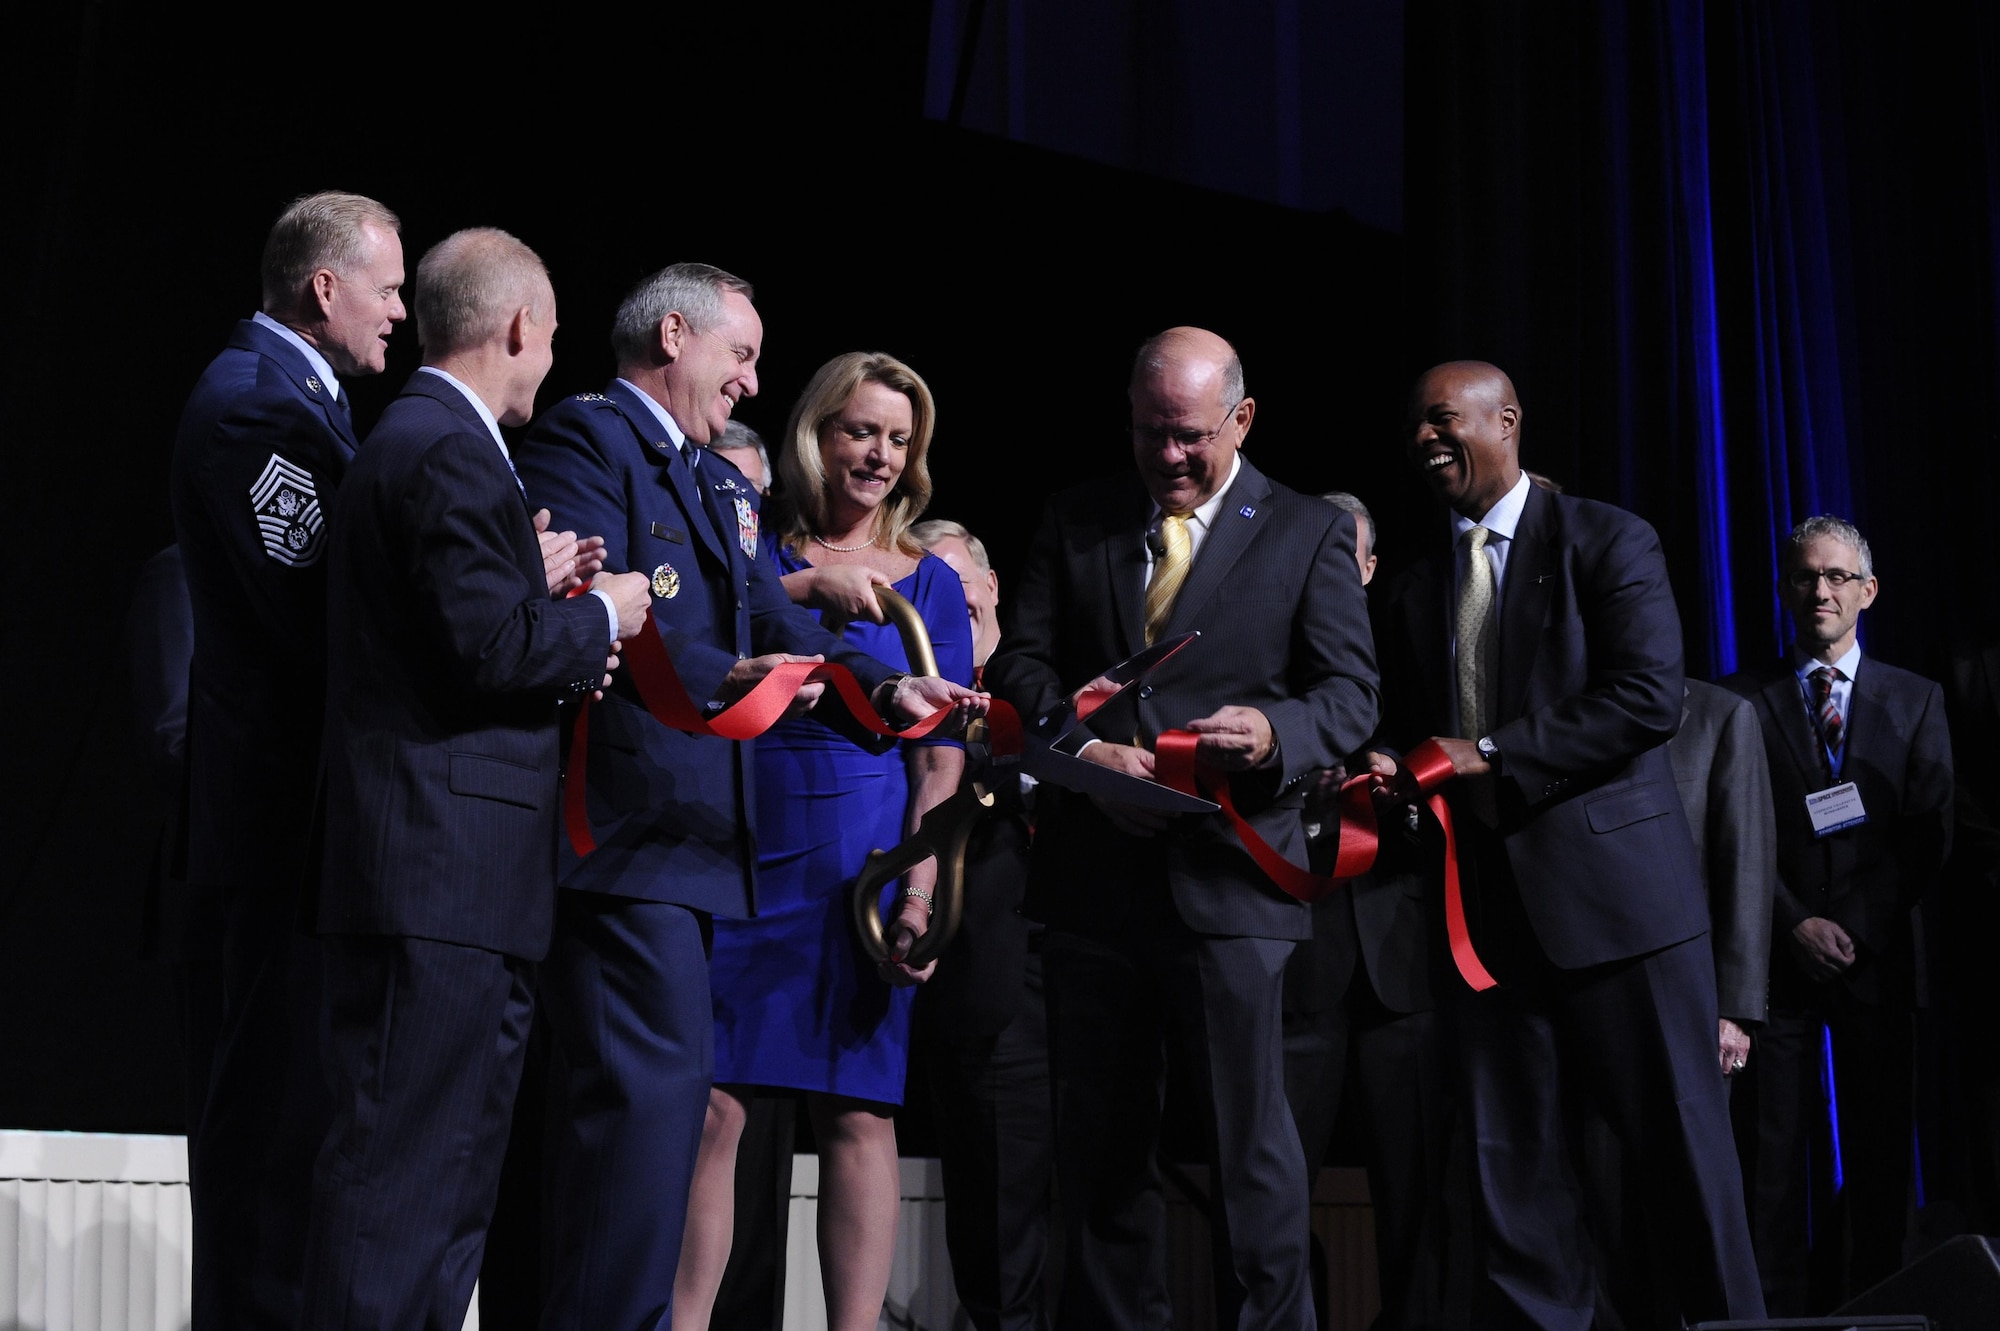 Senior Air Force leaders cut a ribbon during the Air Force Association's Air and Space Conference and Technology Exposition in Washington, D.C. on Sept. 14, 2015. The ribbon cutting ceremony kicked off of the conference and opening of the exhibit hall. (Air Force photo/Staff Sgt. Whitney Stanfield)